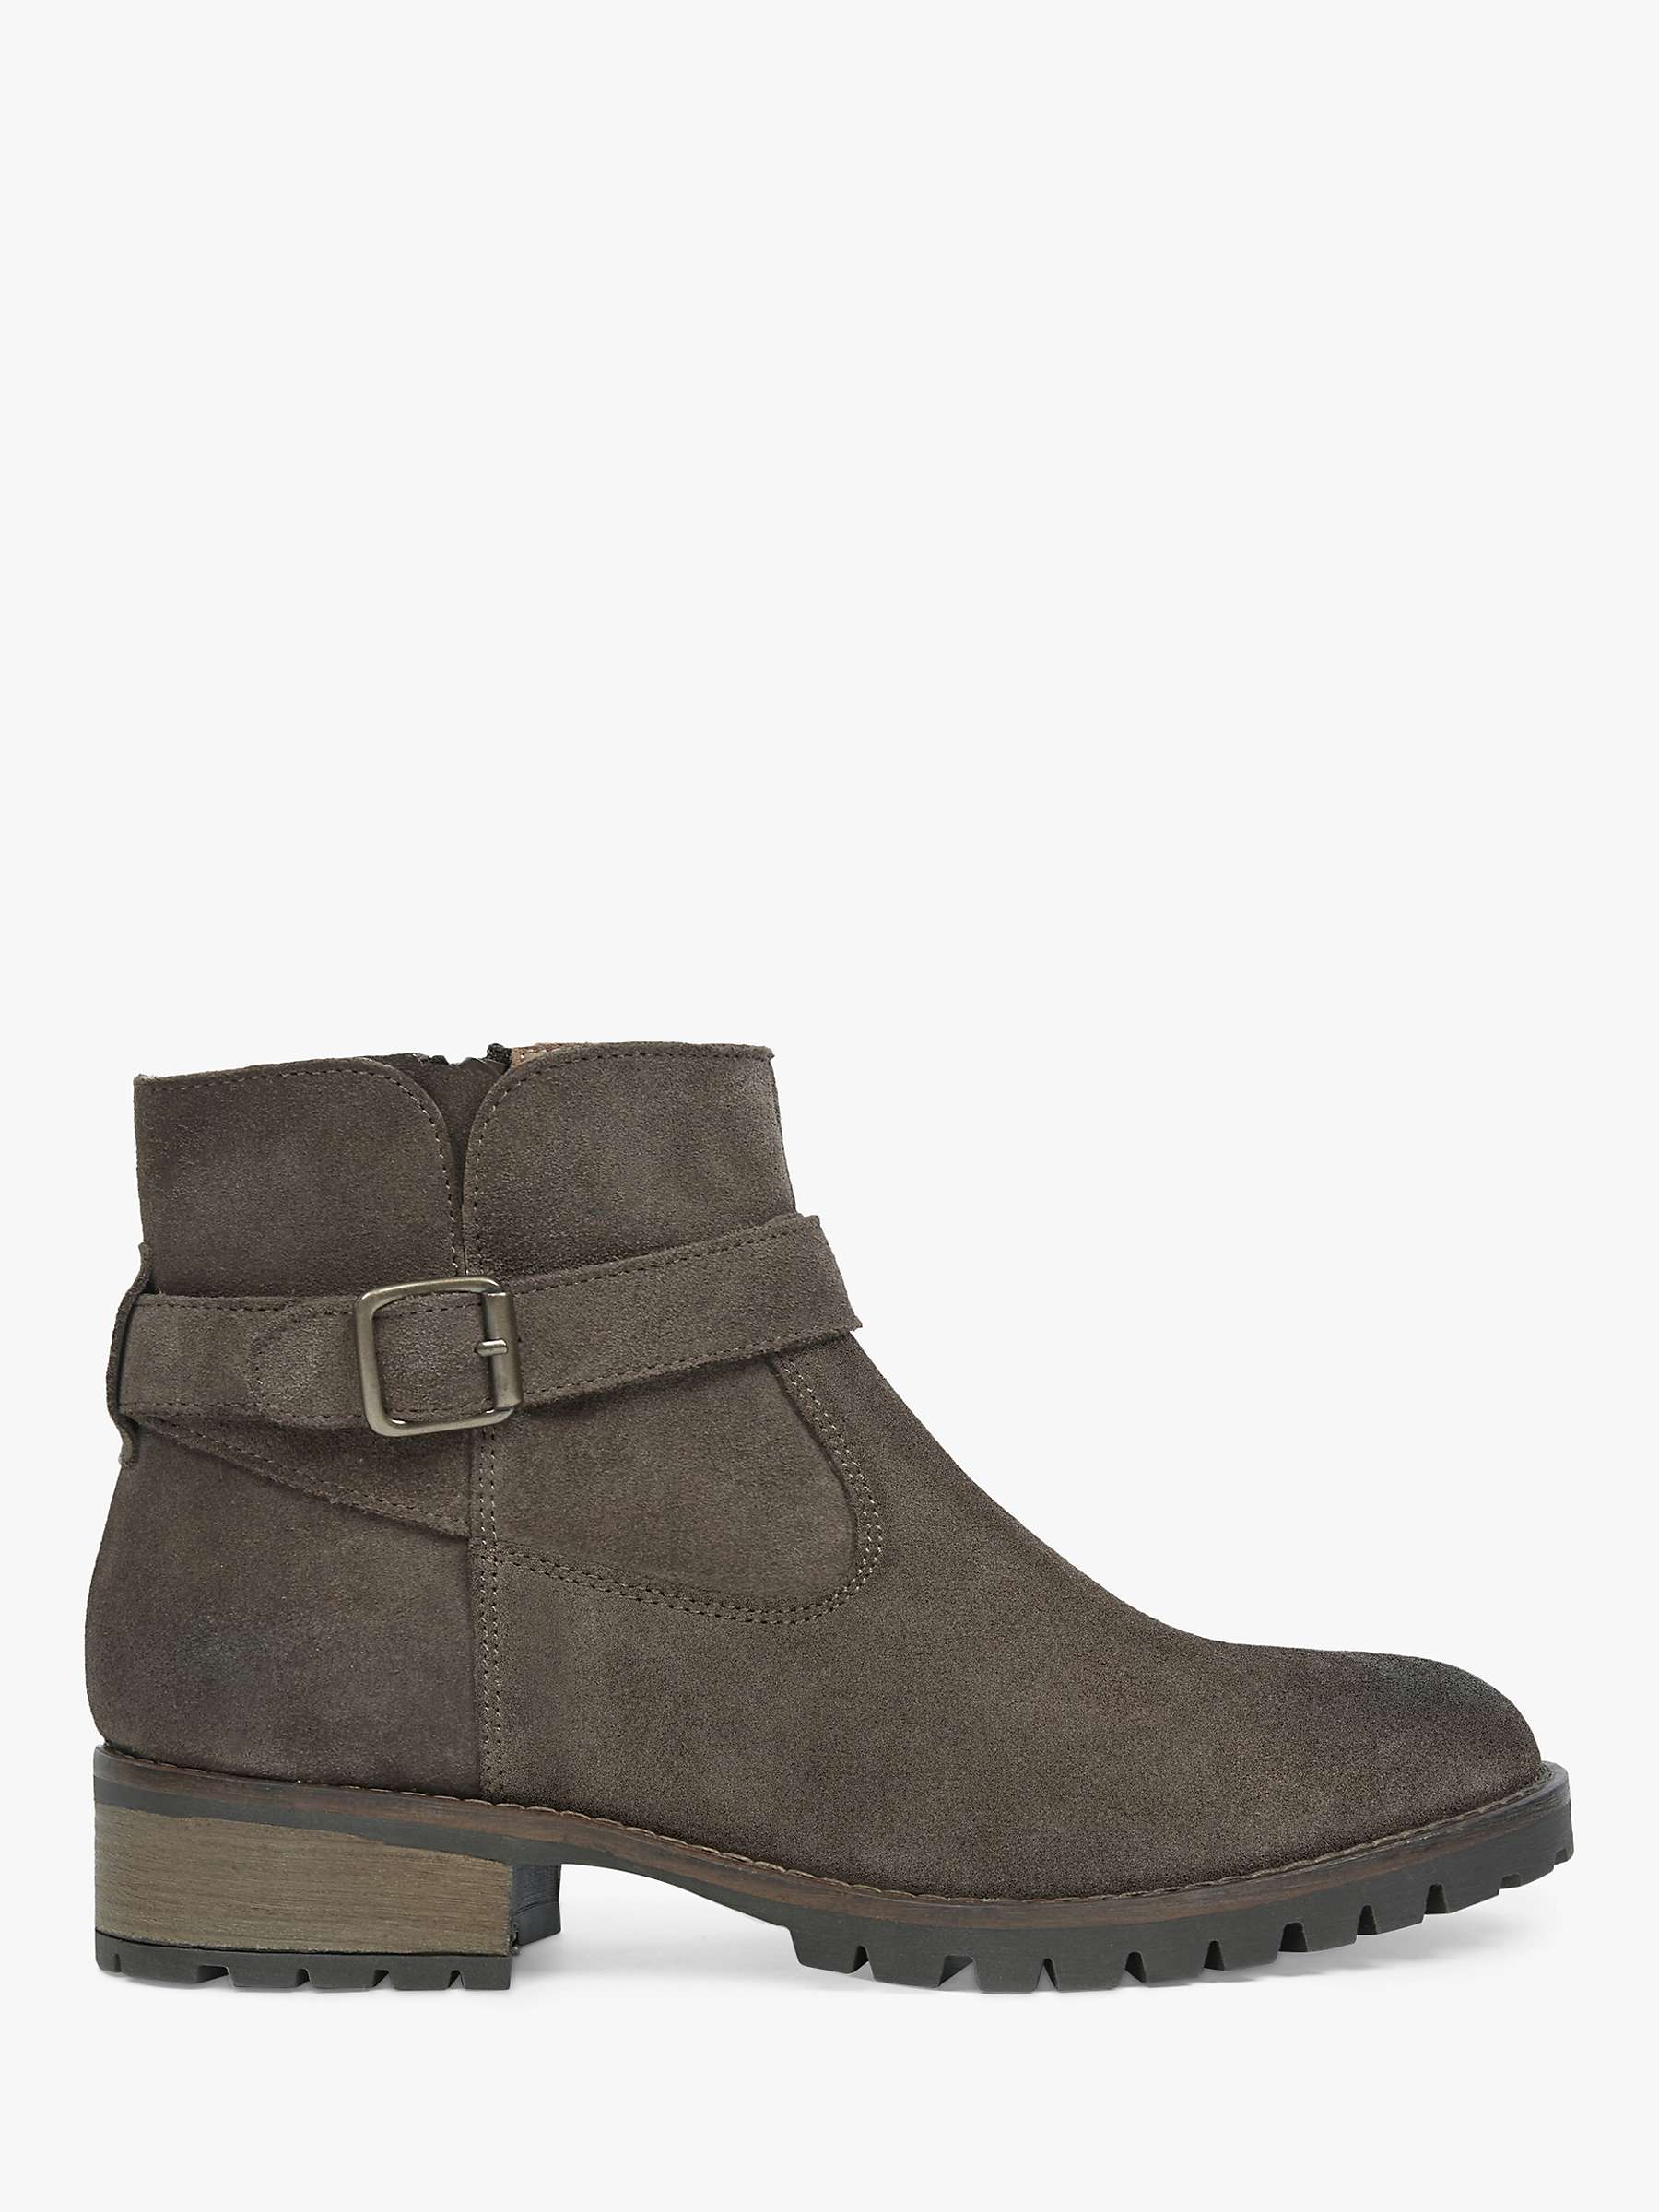 Buy Celtic & Co. Strap Detail Suede Ankle Boots, Tanners Brown Online at johnlewis.com